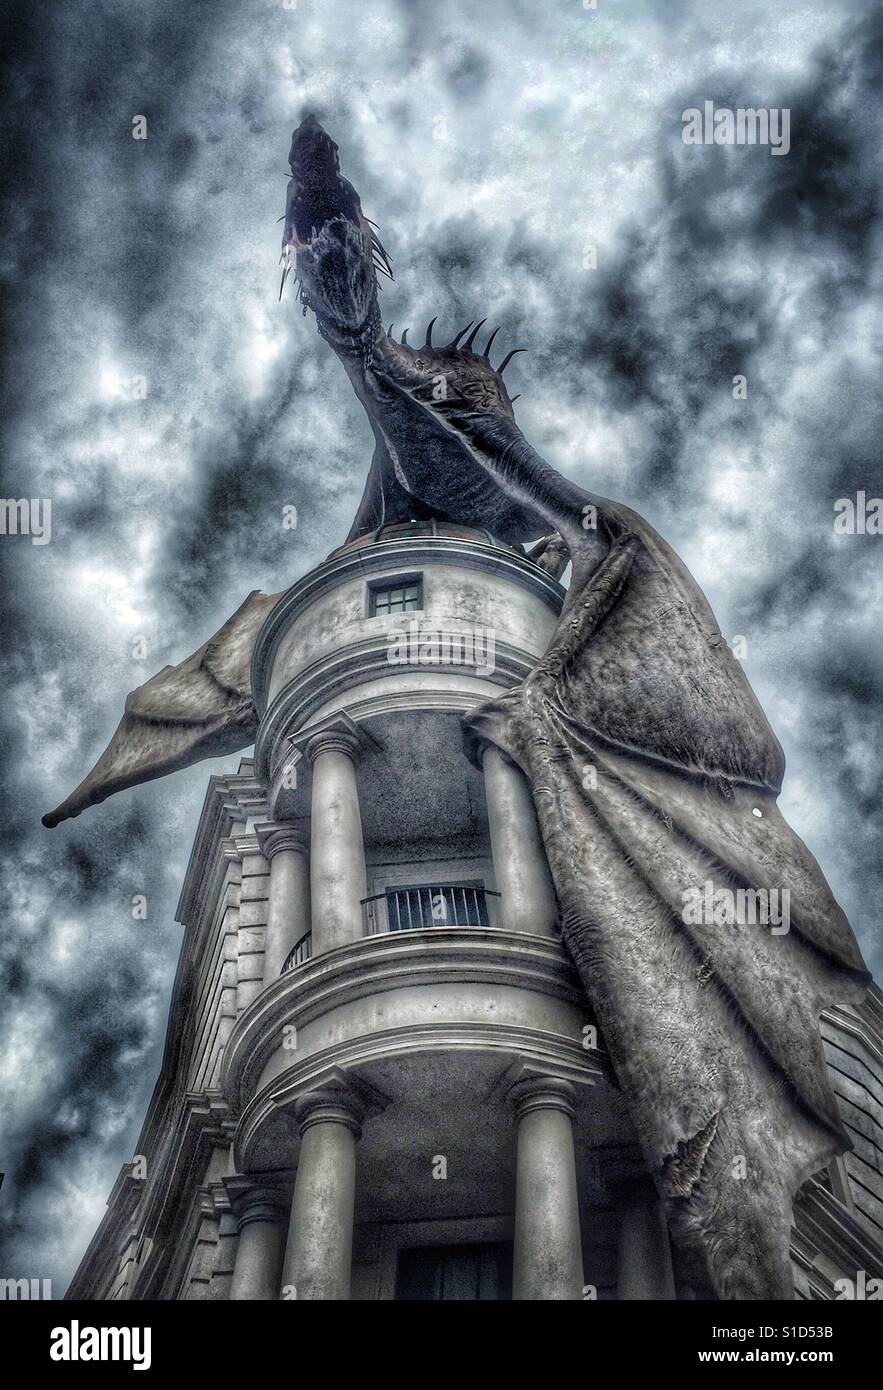 A large dragon sits atop Gringott's Bank at the Wizarding World of Harry Potter at Universal Studios in Orlando, Florida Stock Photo